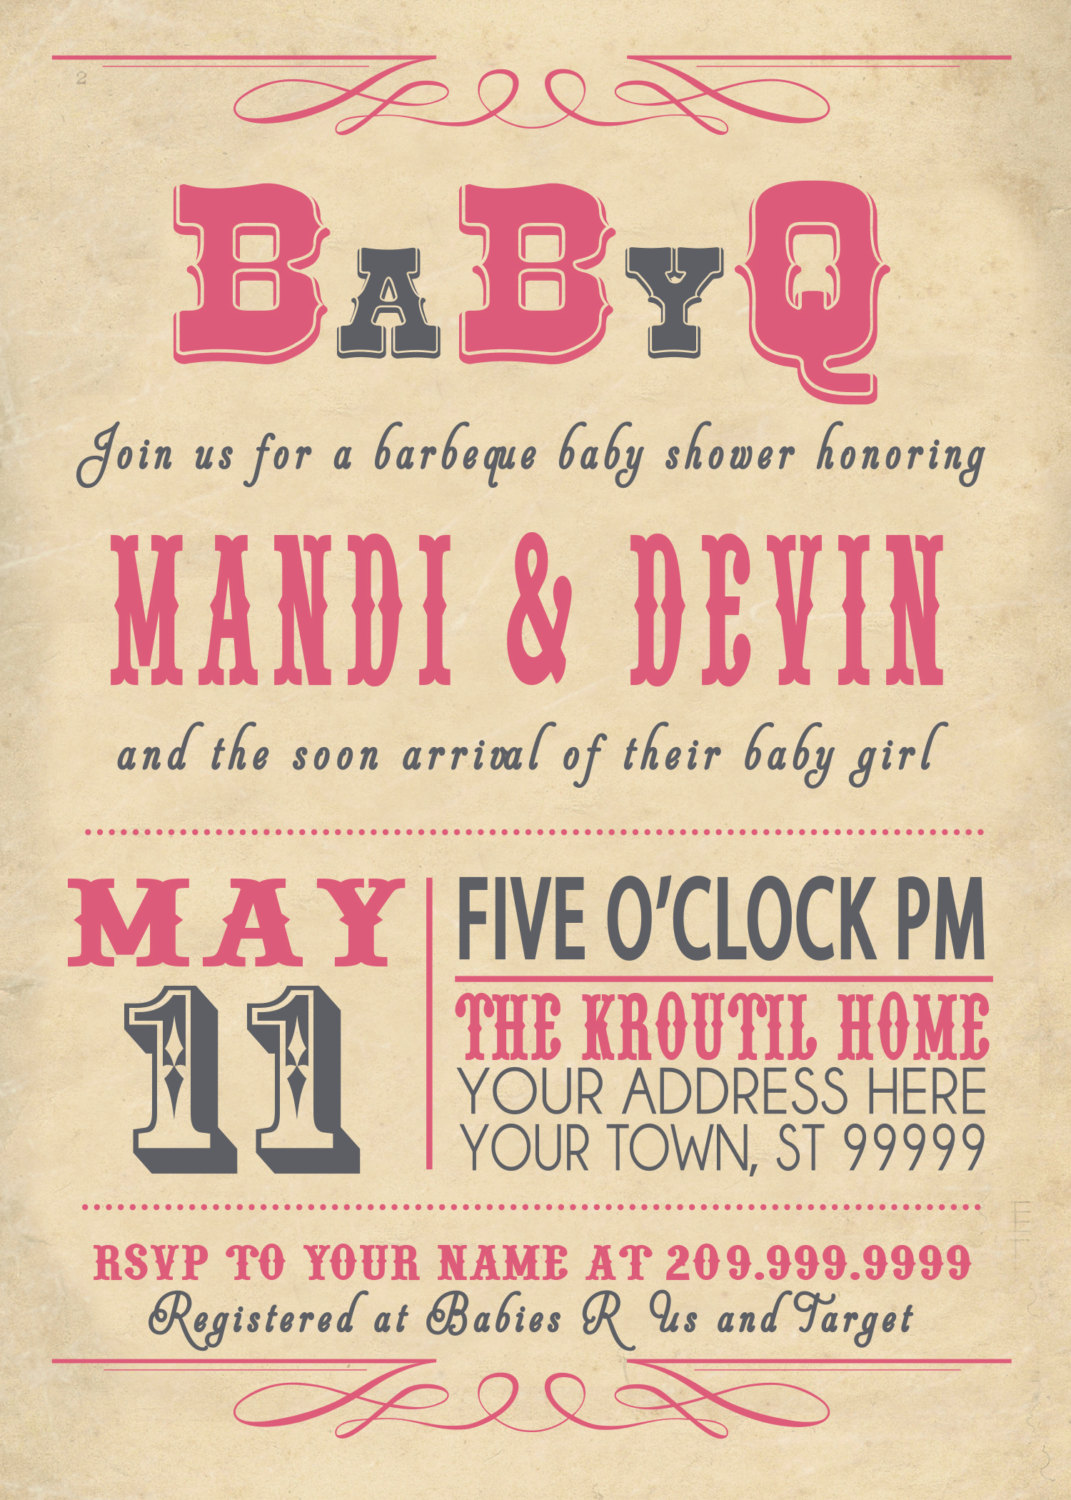 Full Size of Baby Shower:delightful Baby Shower Invitation Wording Picture Designs Cheap Baby Shower Favors With Baby Boy Shower Favors Plus Baby Shower Outfit Guest Together With Cheap Baby Shower Gifts As Well As How To Plan A Baby Shower And Baby Shower Images